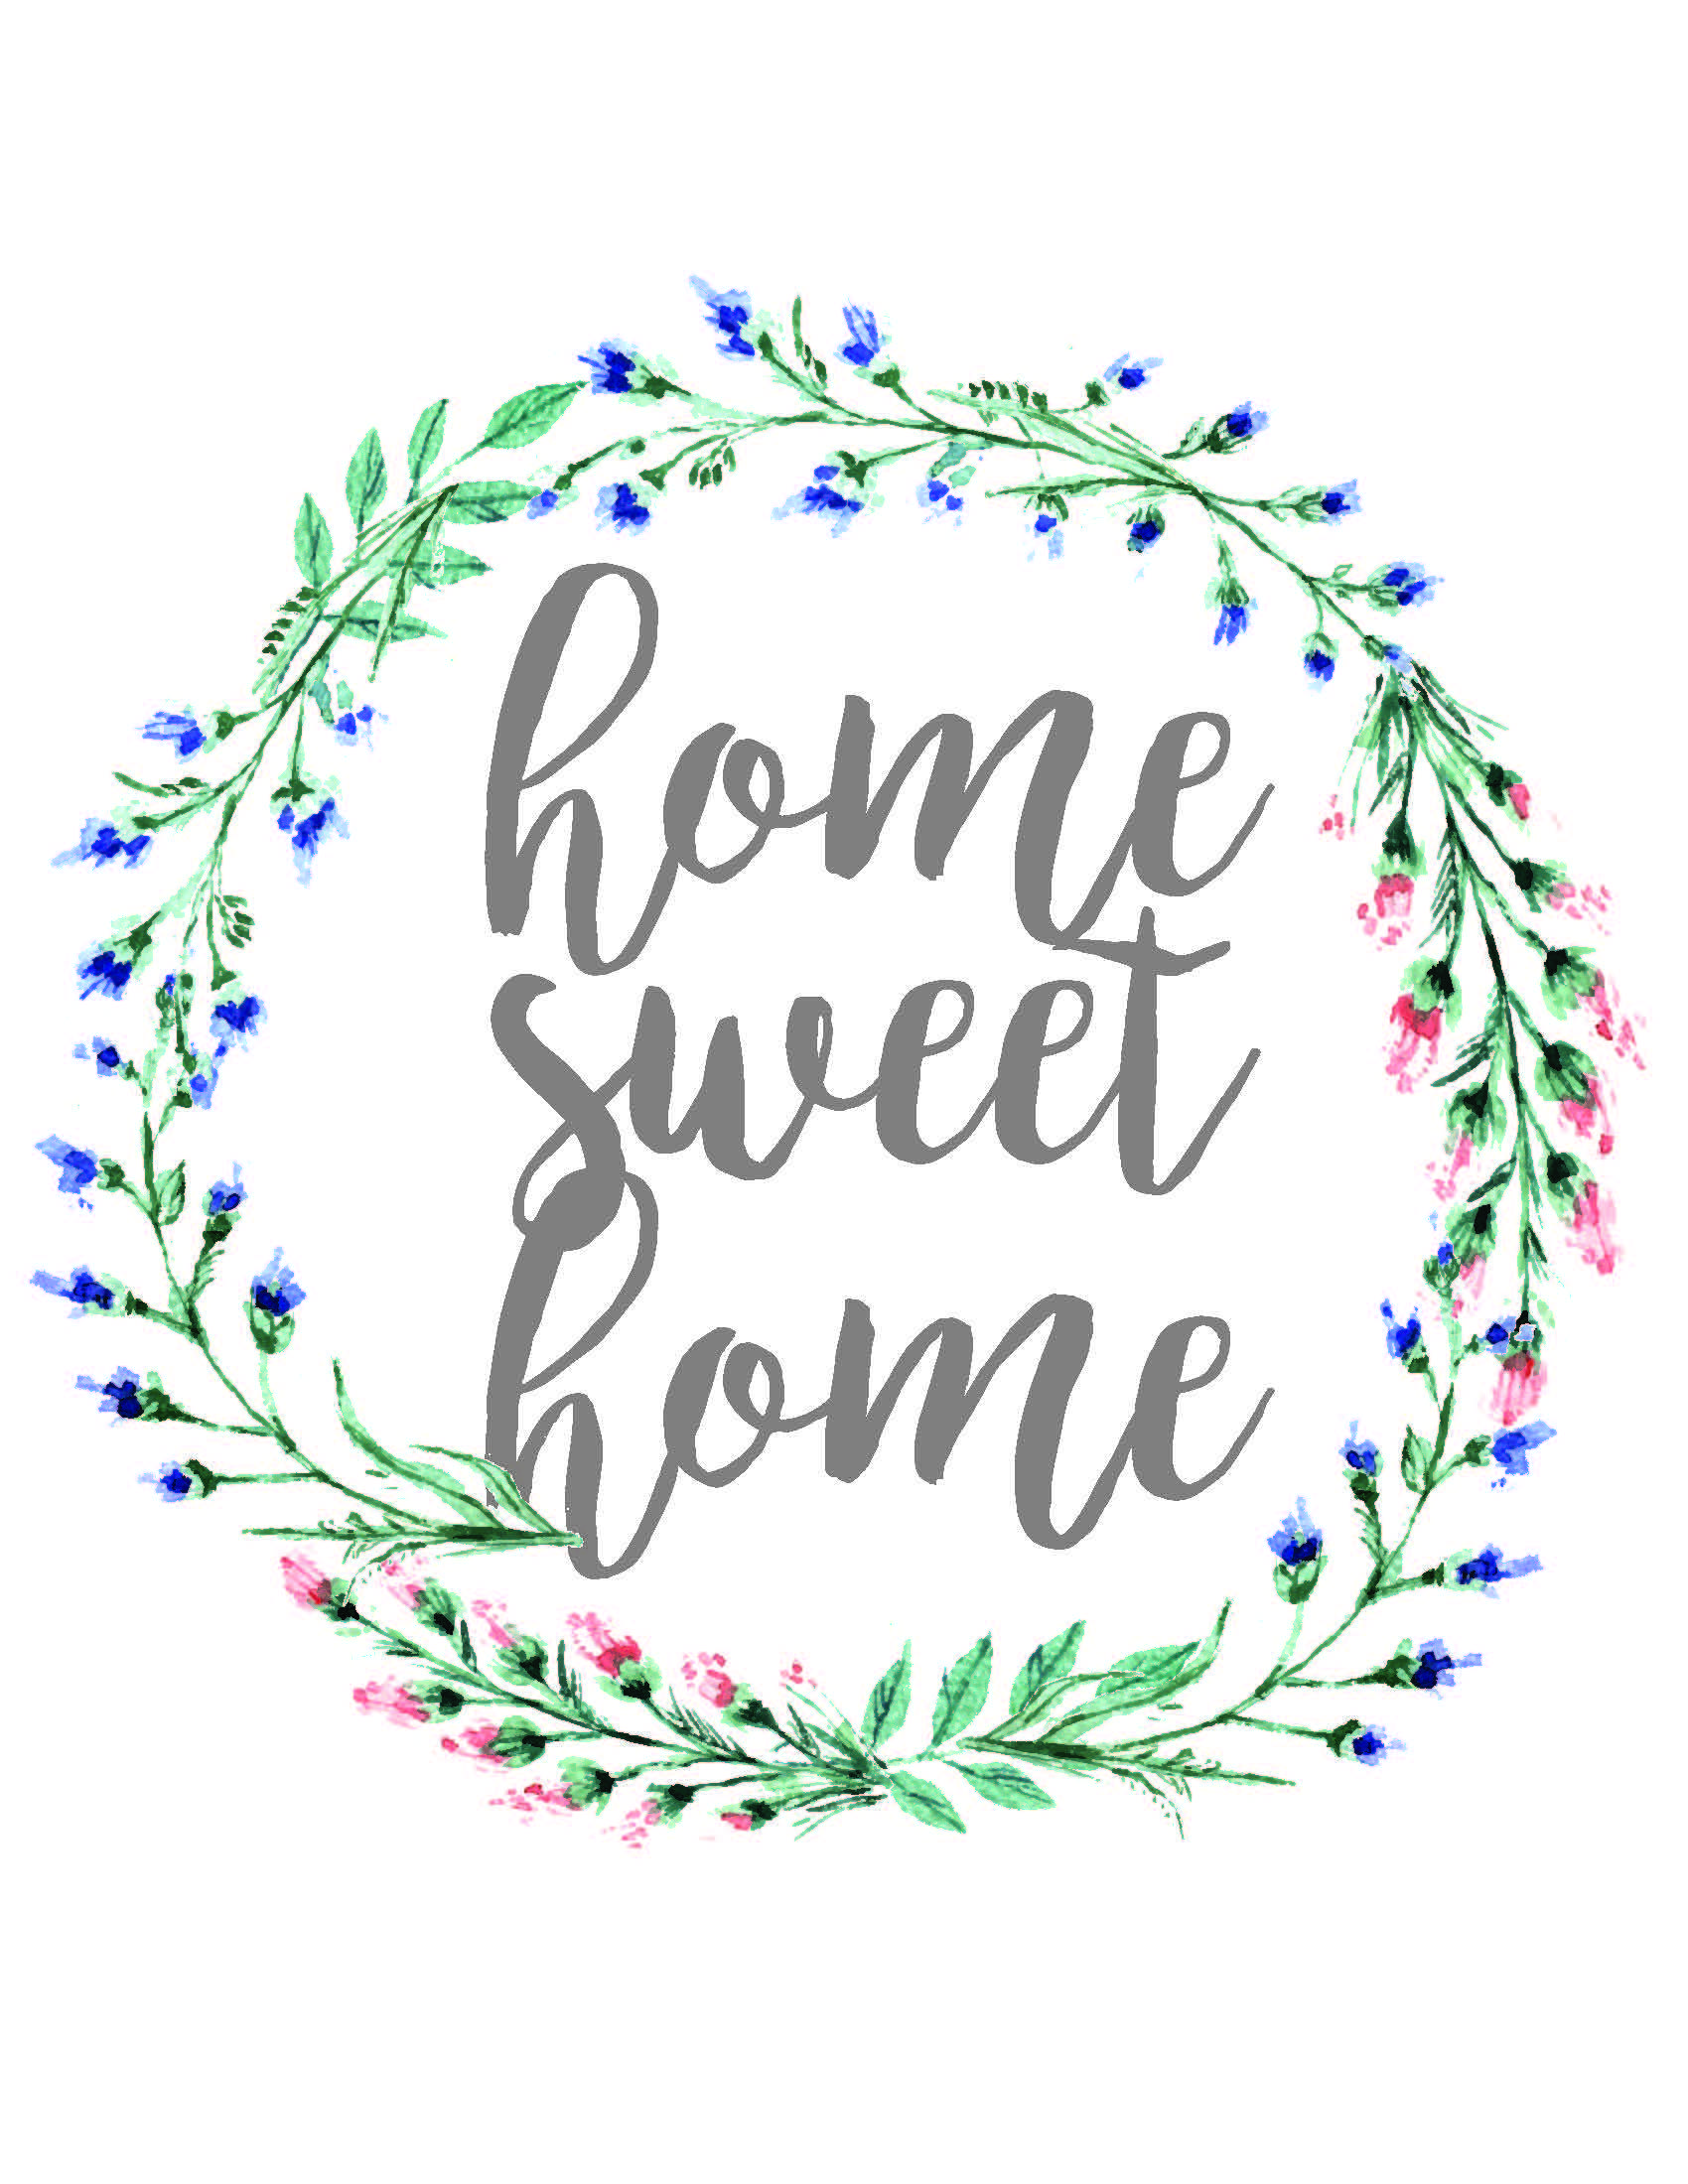 Home sweet home 2 game download free full version